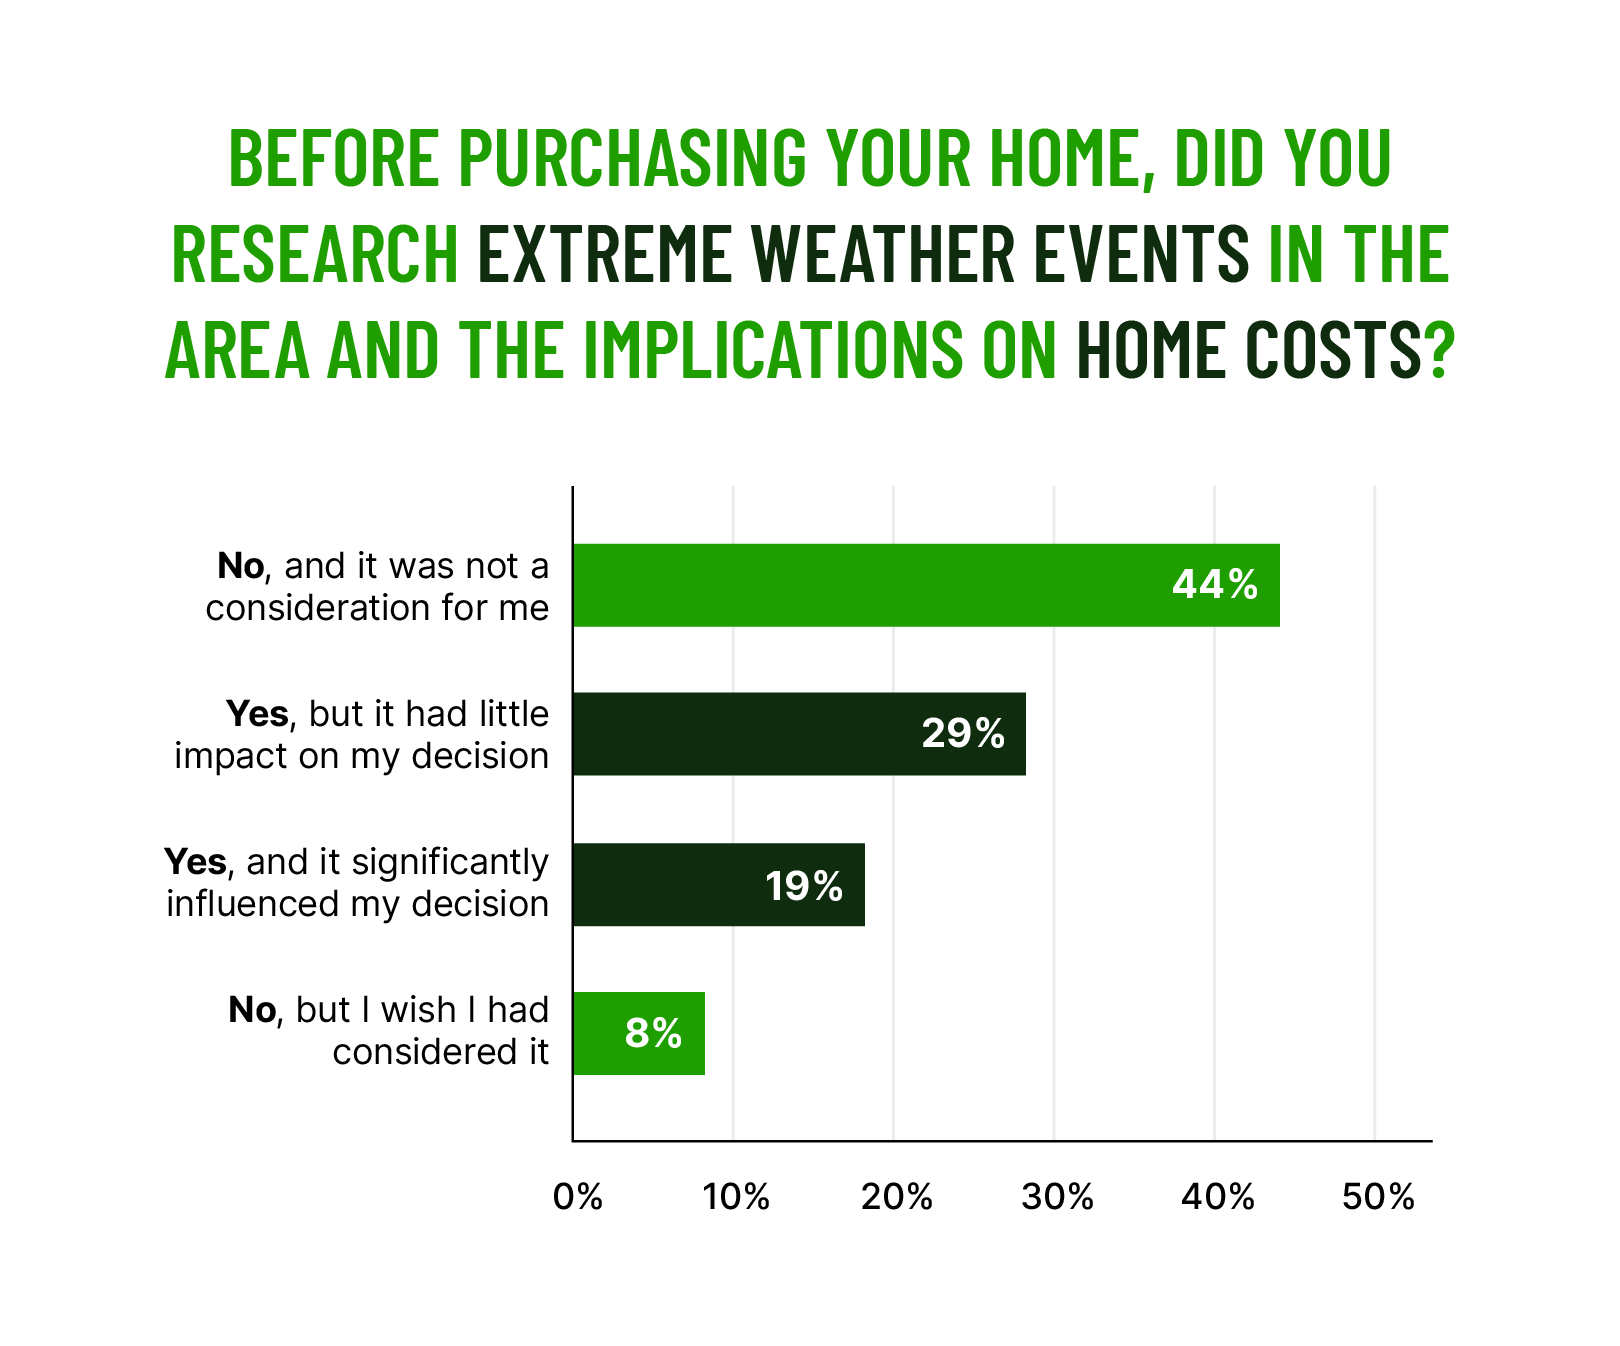 horizontal bar chart showing how many homeowners did and did not research extreme weather events before purchasing their home